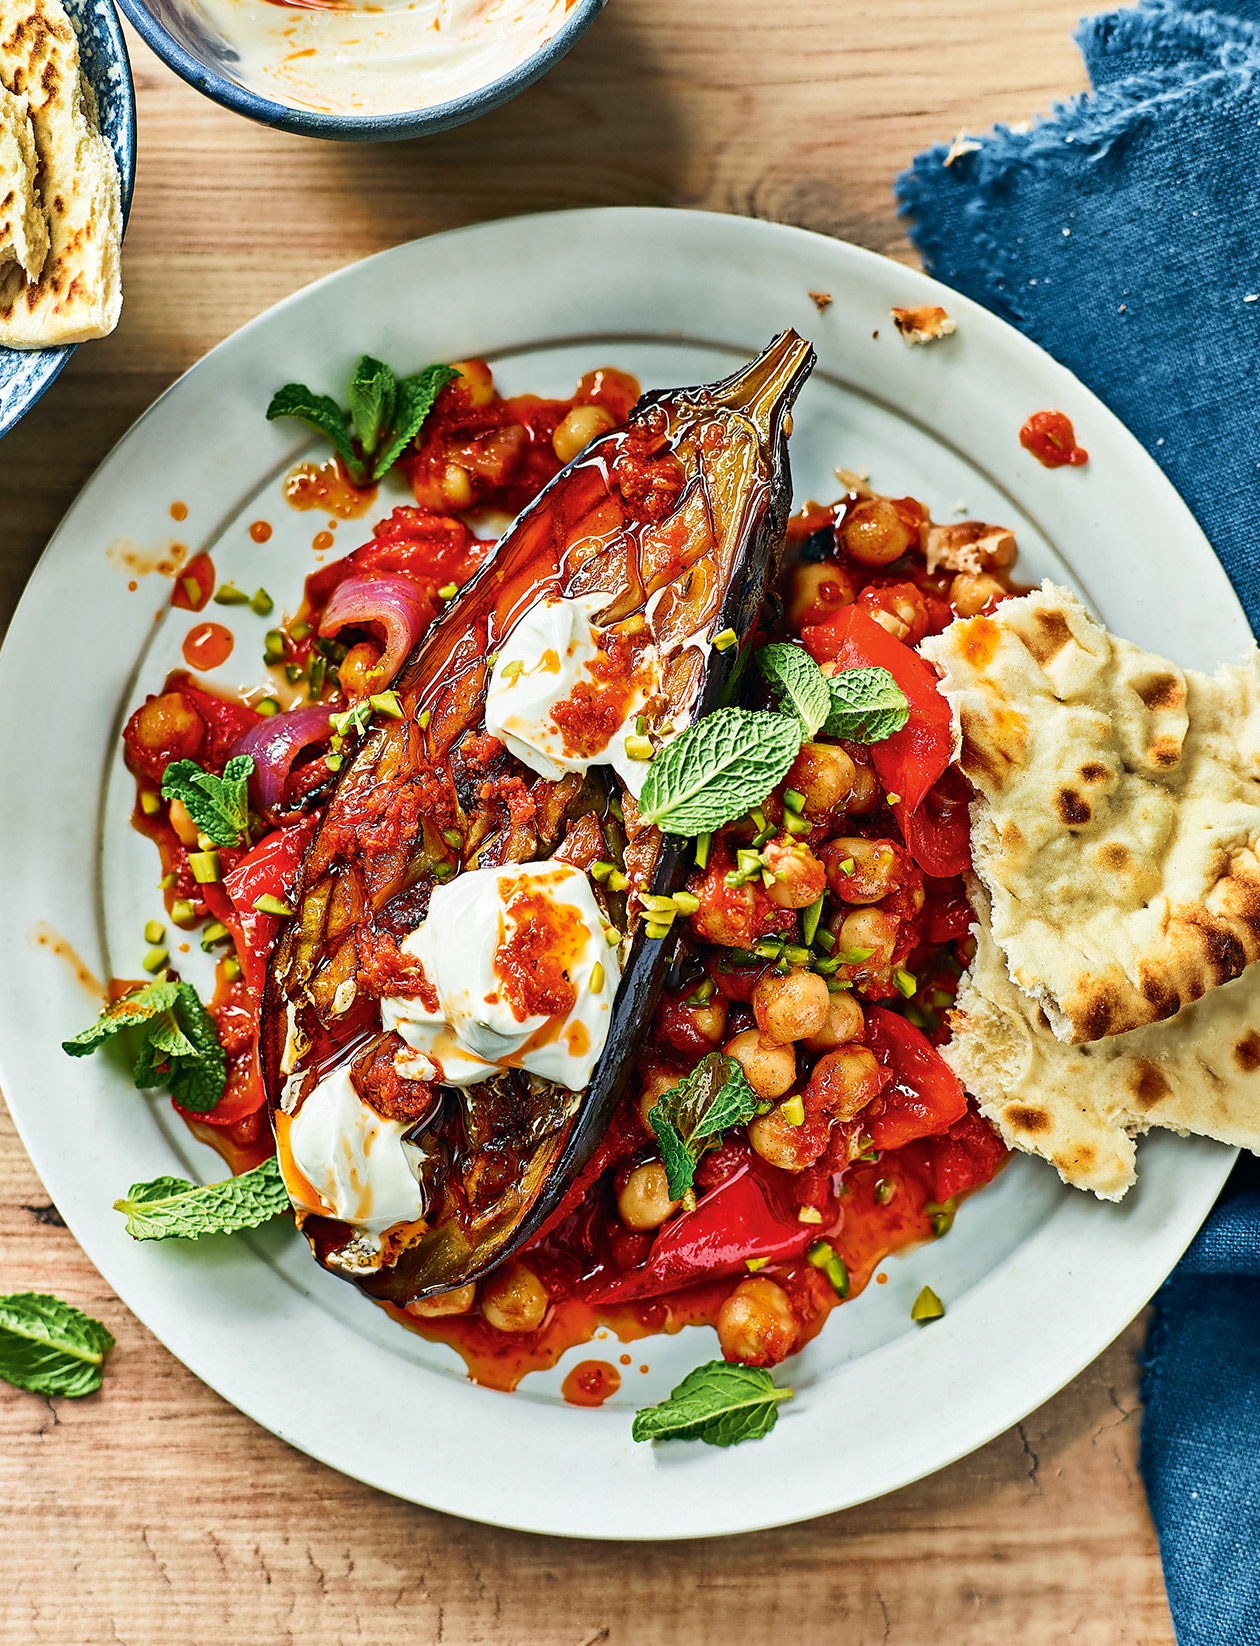 Roasted harissa aubergines with tomato, red pepper and chickpea stew ...